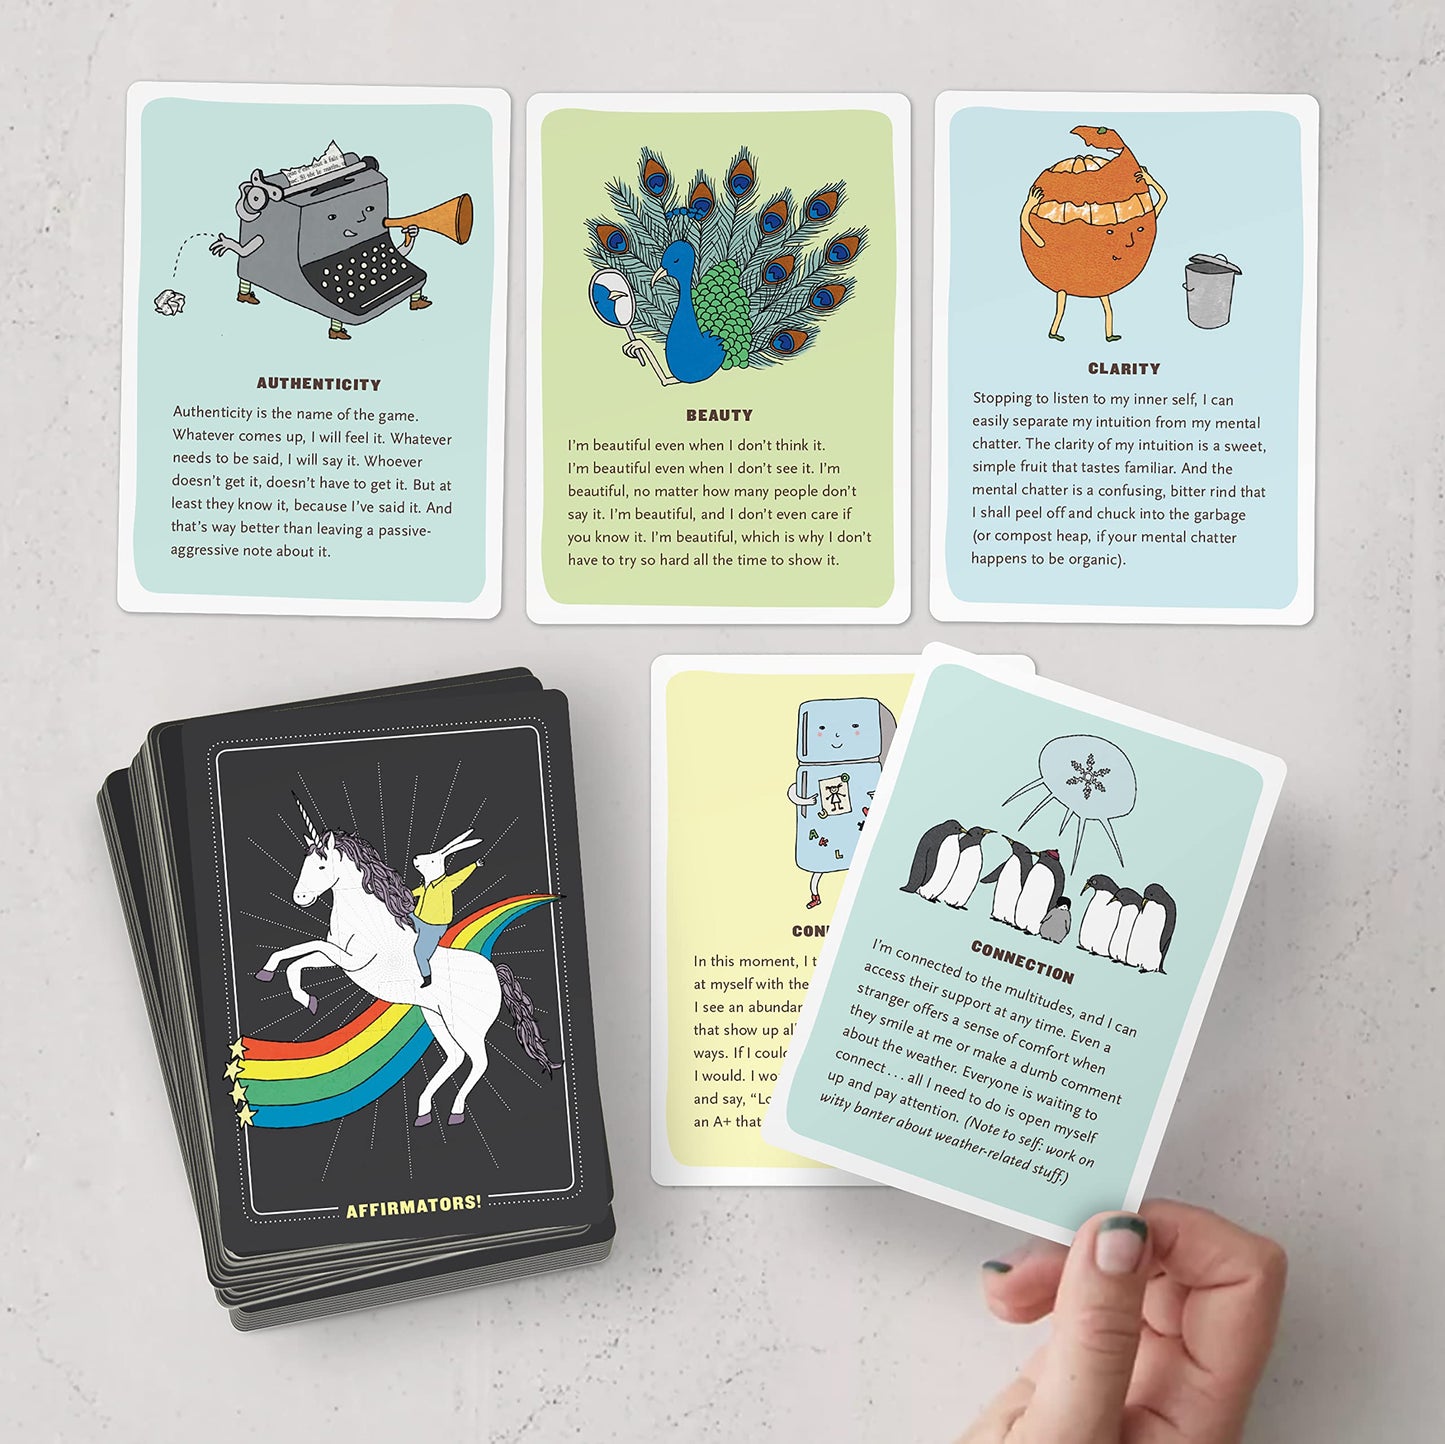 Affirmators! 50 Affirmation Cards Deck to Help You Help Yourself - Without the Self-Helpy-Ness! Cards